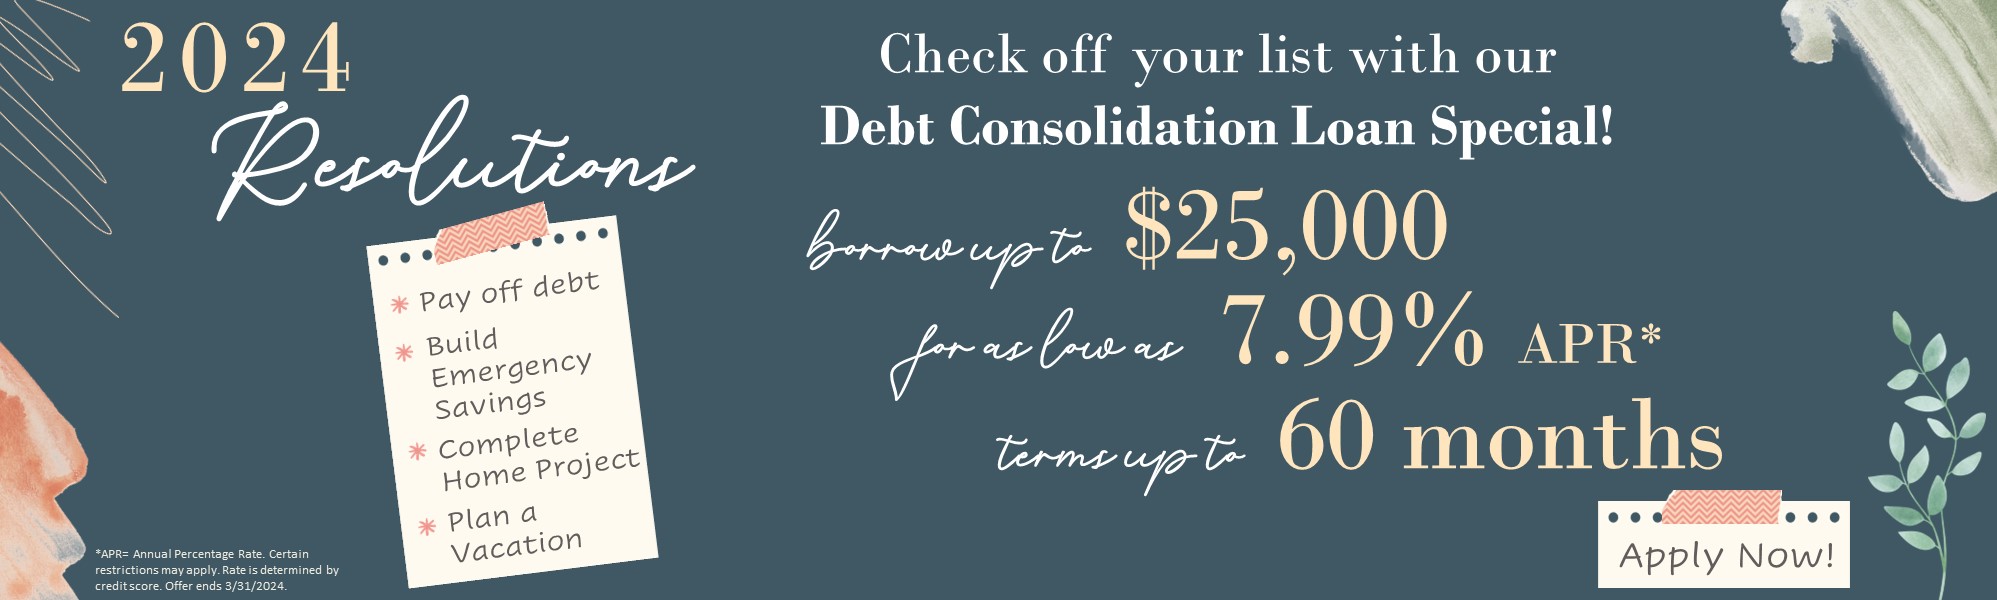 Debt Consolidation loan. borrow up to $25,000. Click to learn more